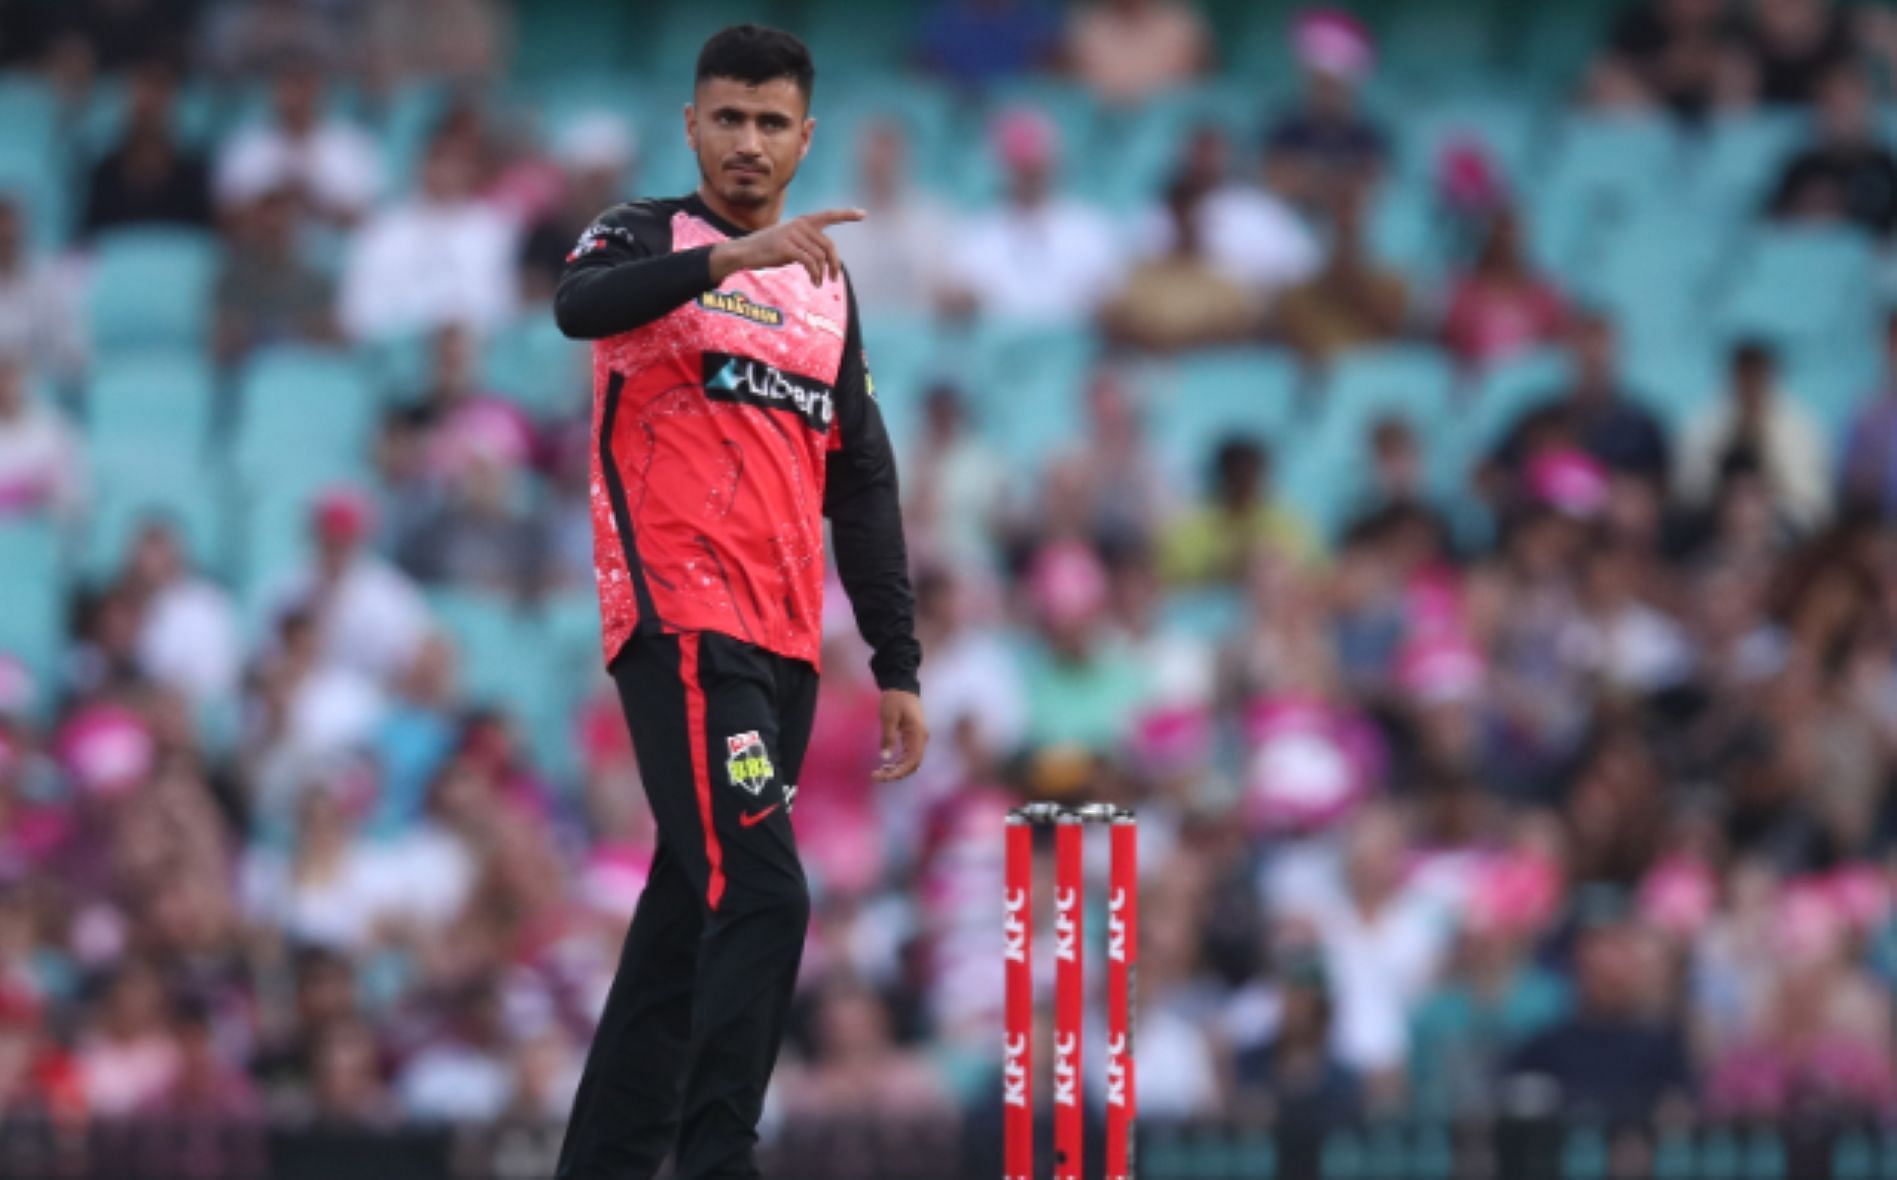 Mujeeb has played in all six games for the Renegades this season